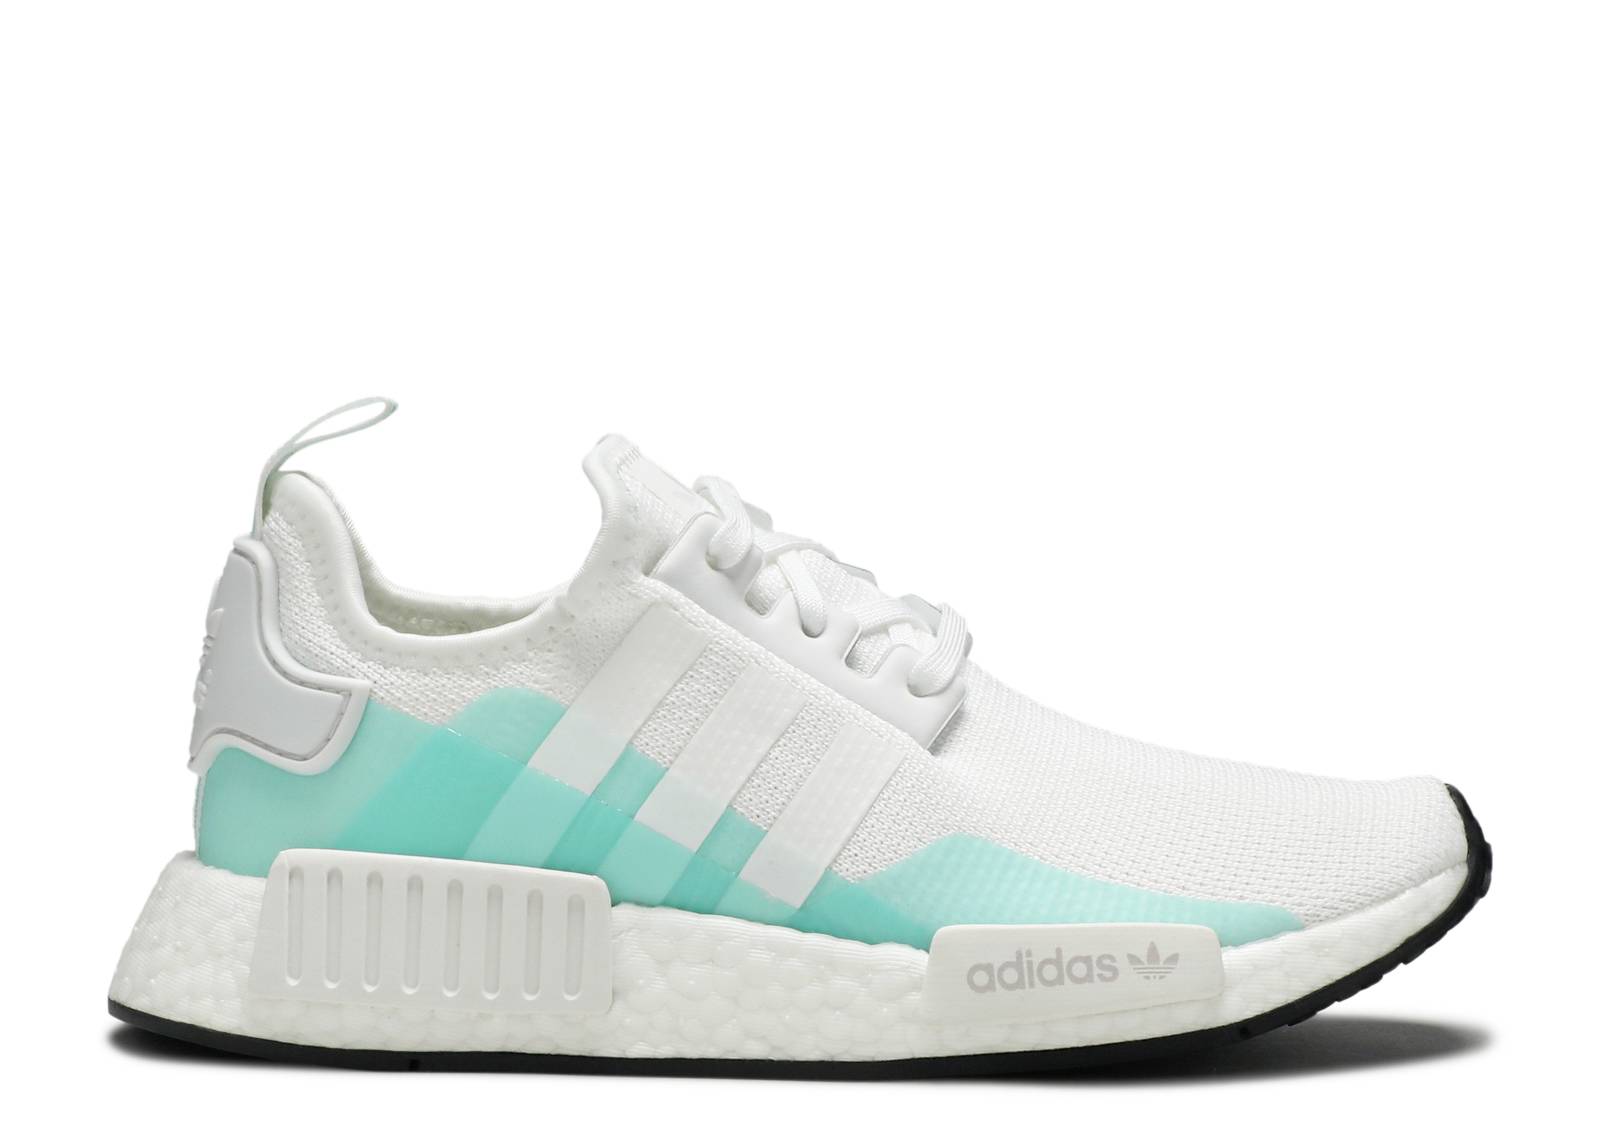 NMD_R1 J 'White Clear Mint'